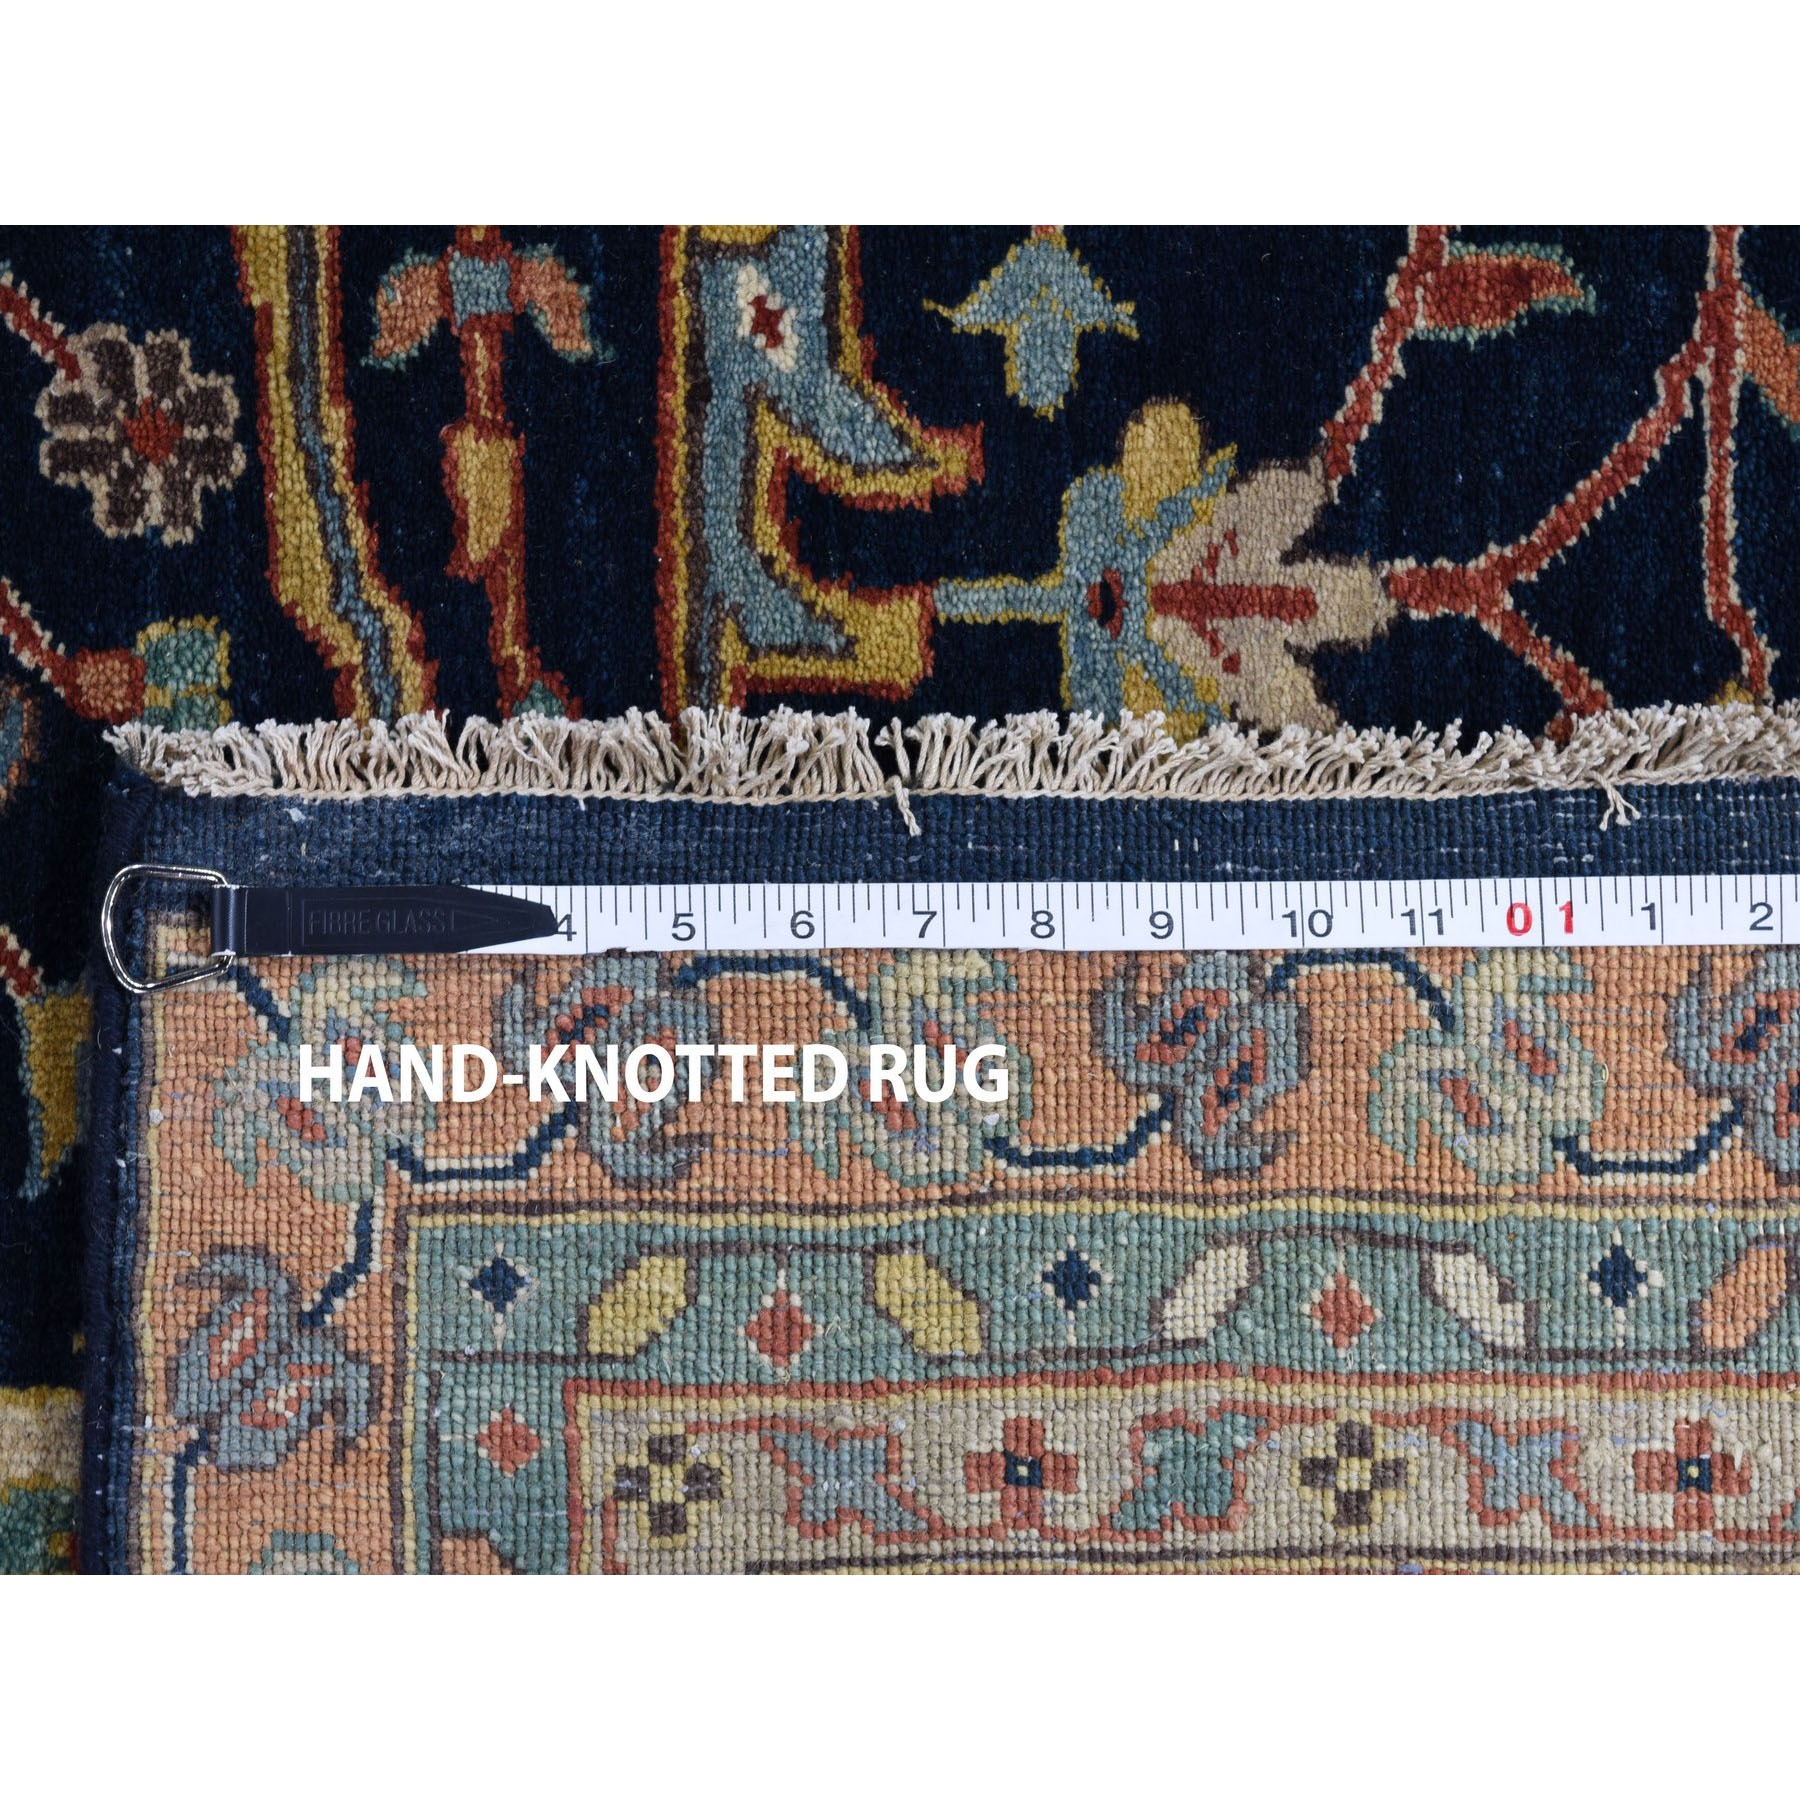 11-10 x15- Blue Oversized Antiqued Heriz Re-Creation Pure Wool Hand Knotted Oriental Rug 